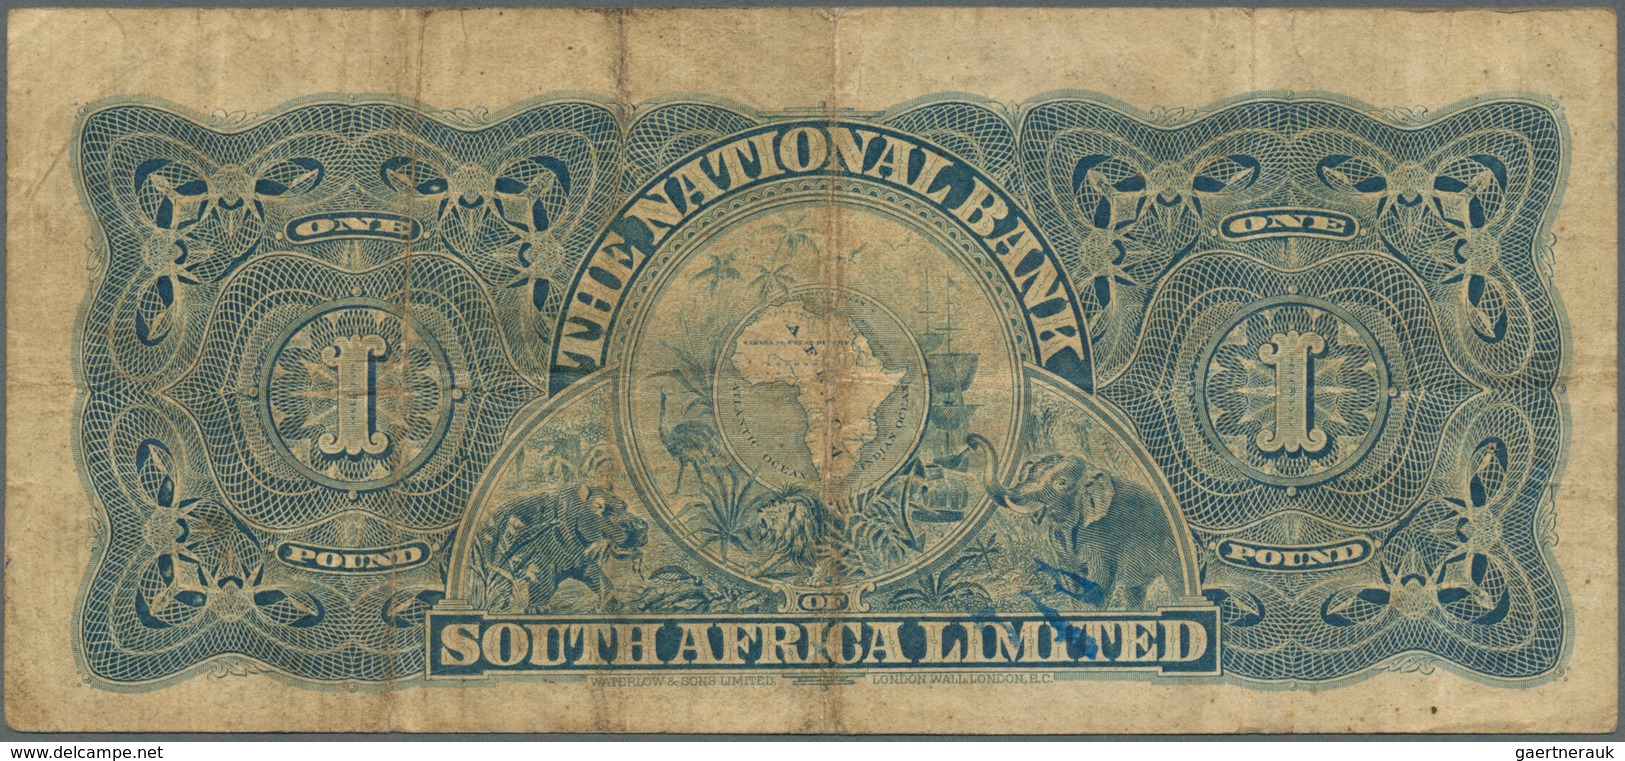 02386 South Africa / Südafrika: Natal Issue Of National Bank Of South Africa, 1 Pound 1919 P. S392, Used W - Zuid-Afrika